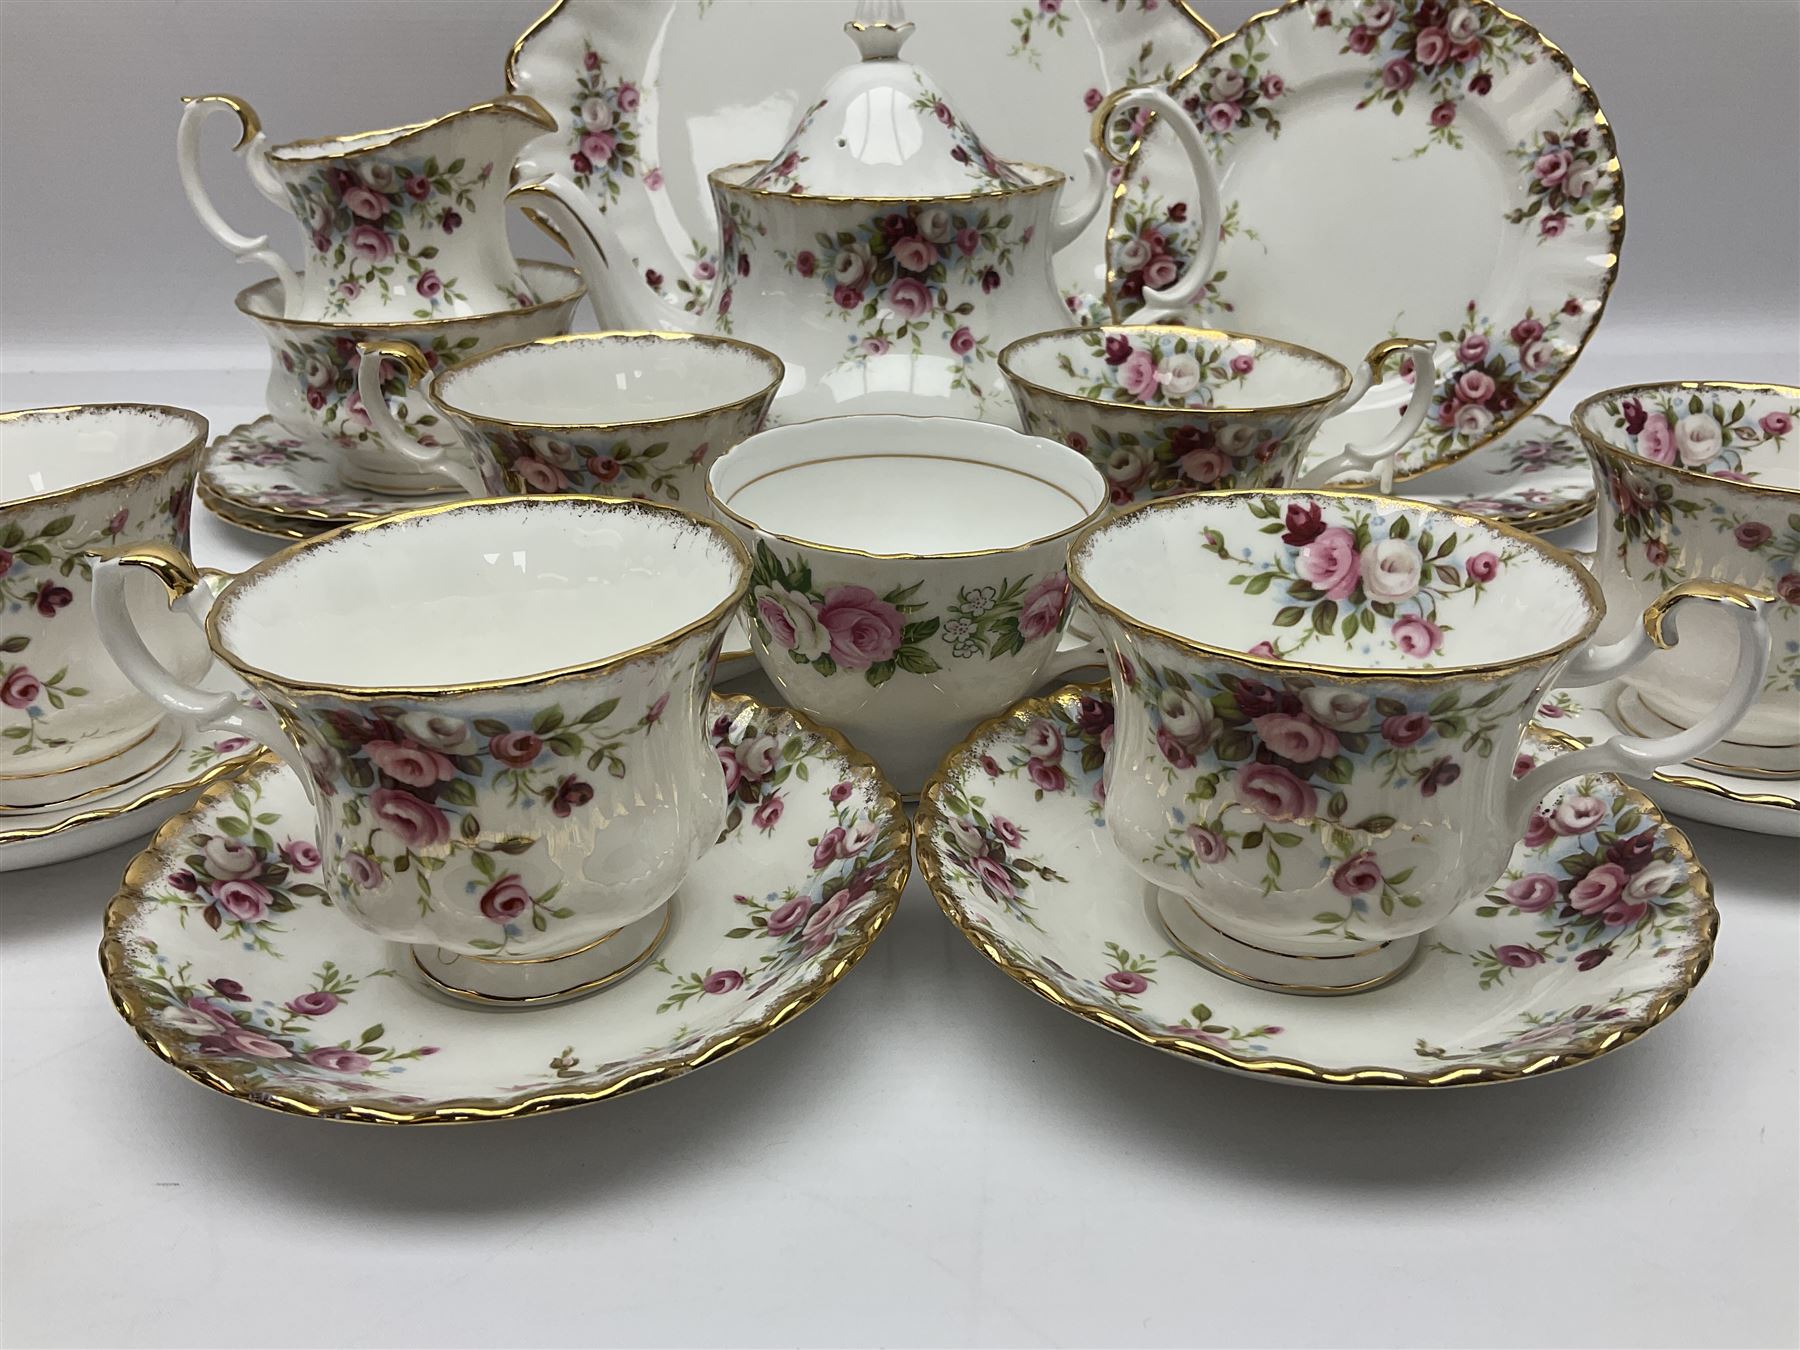 Royal Albert Cottage Garden pattern tea service for six people - Image 2 of 10